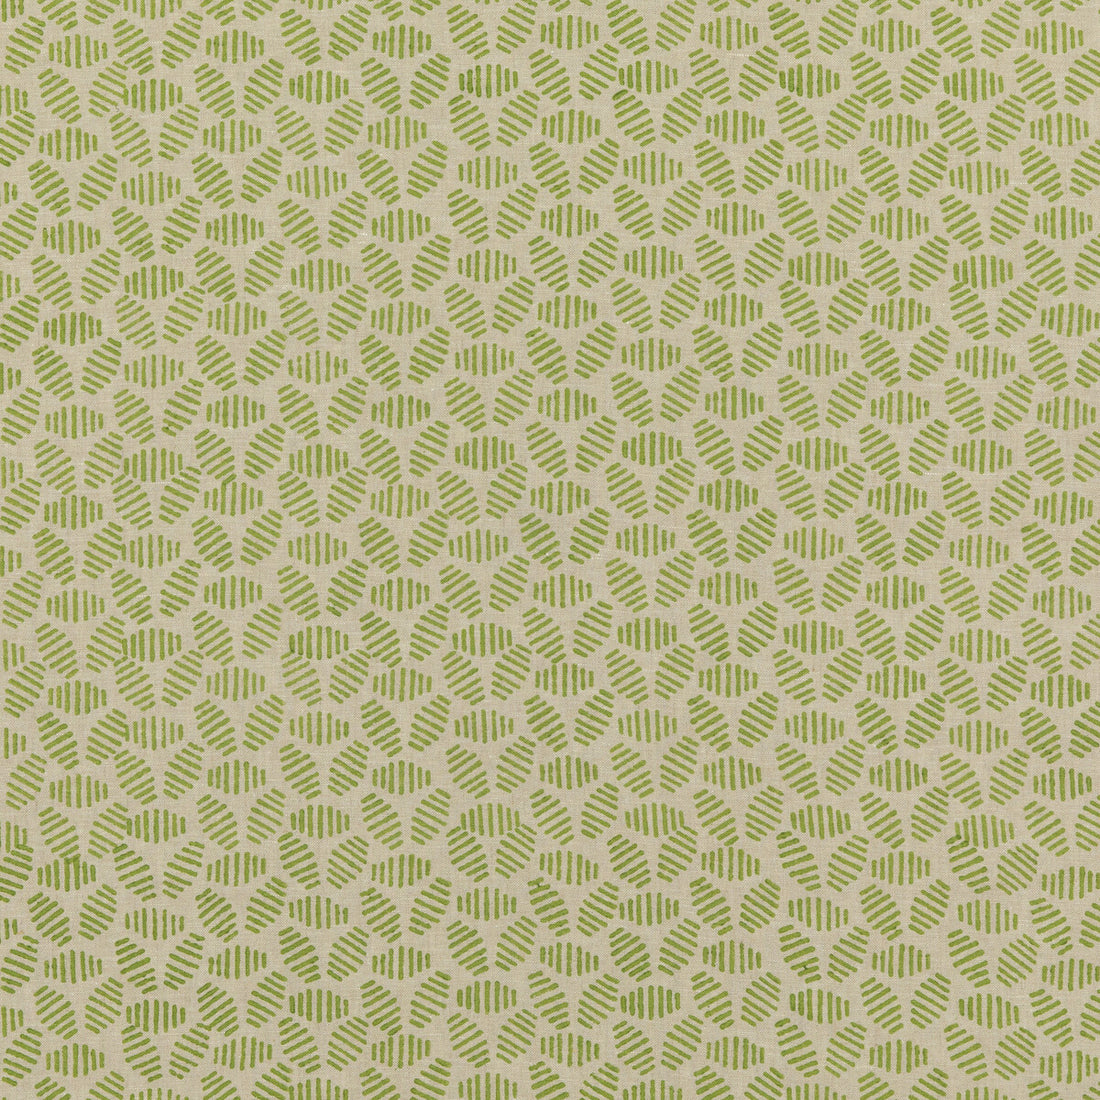 Bumble Bee fabric in green color - pattern PP50482.5.0 - by Baker Lifestyle in the Block Party collection